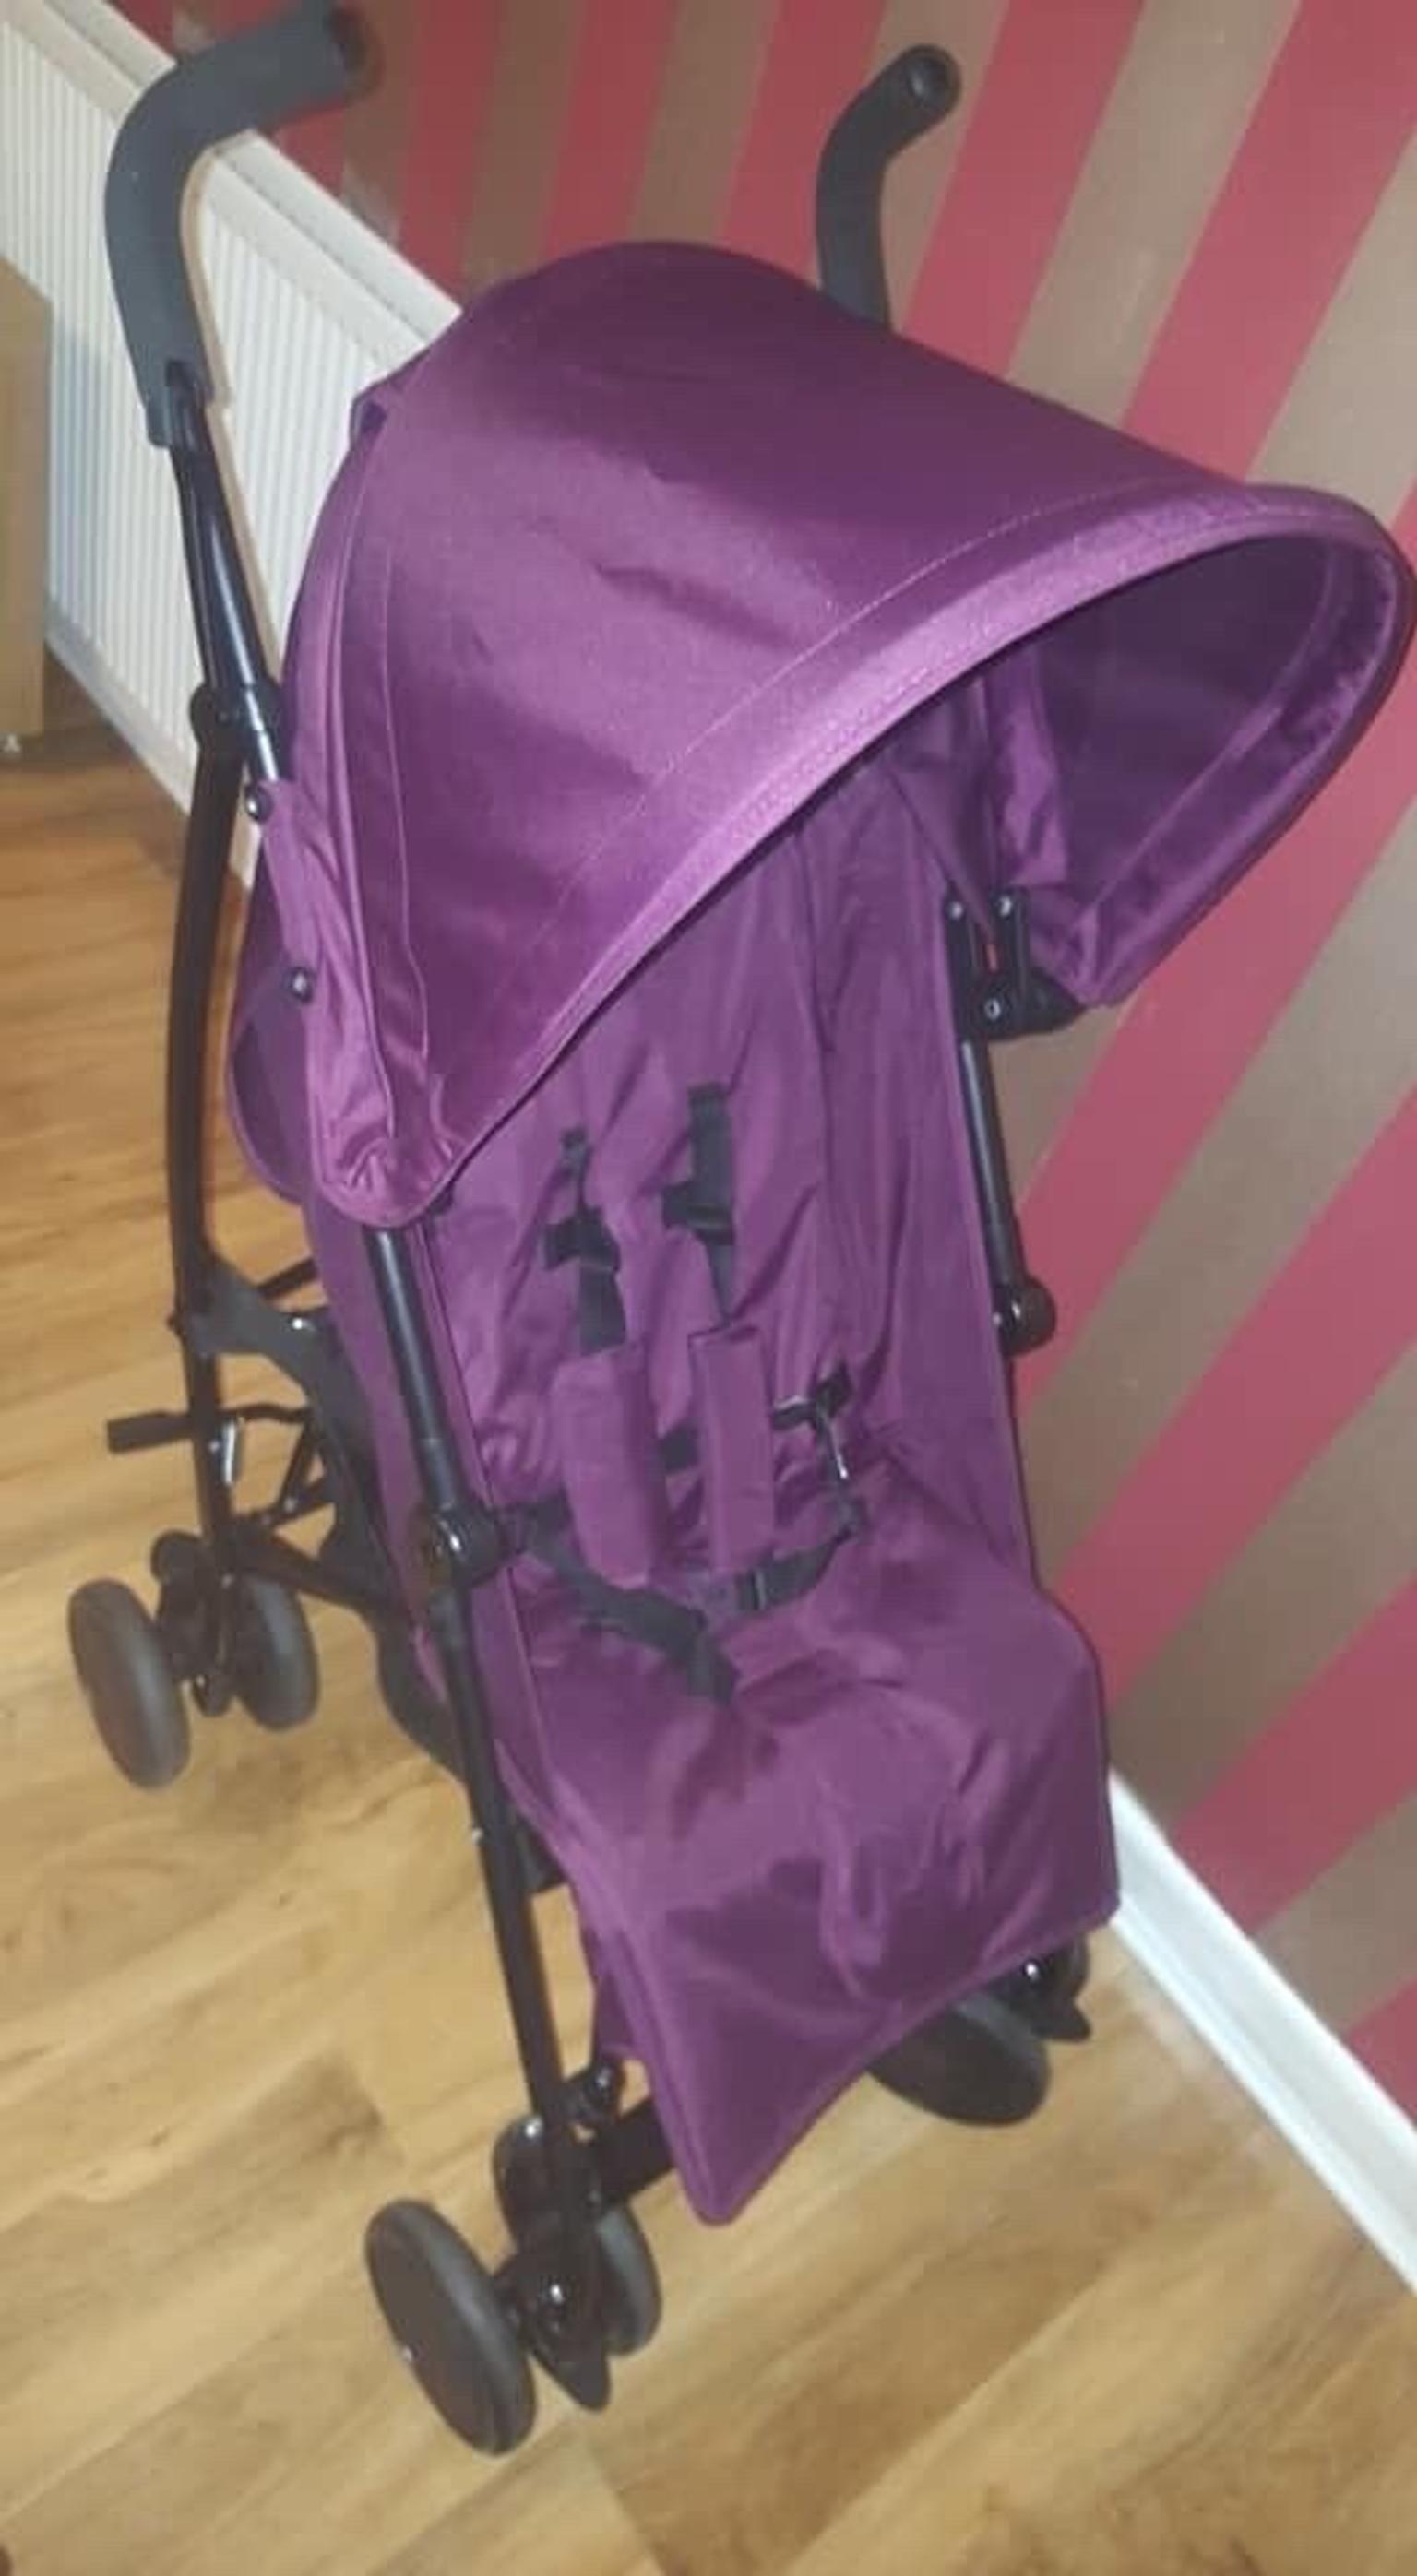 cuggl maple pushchair instructions